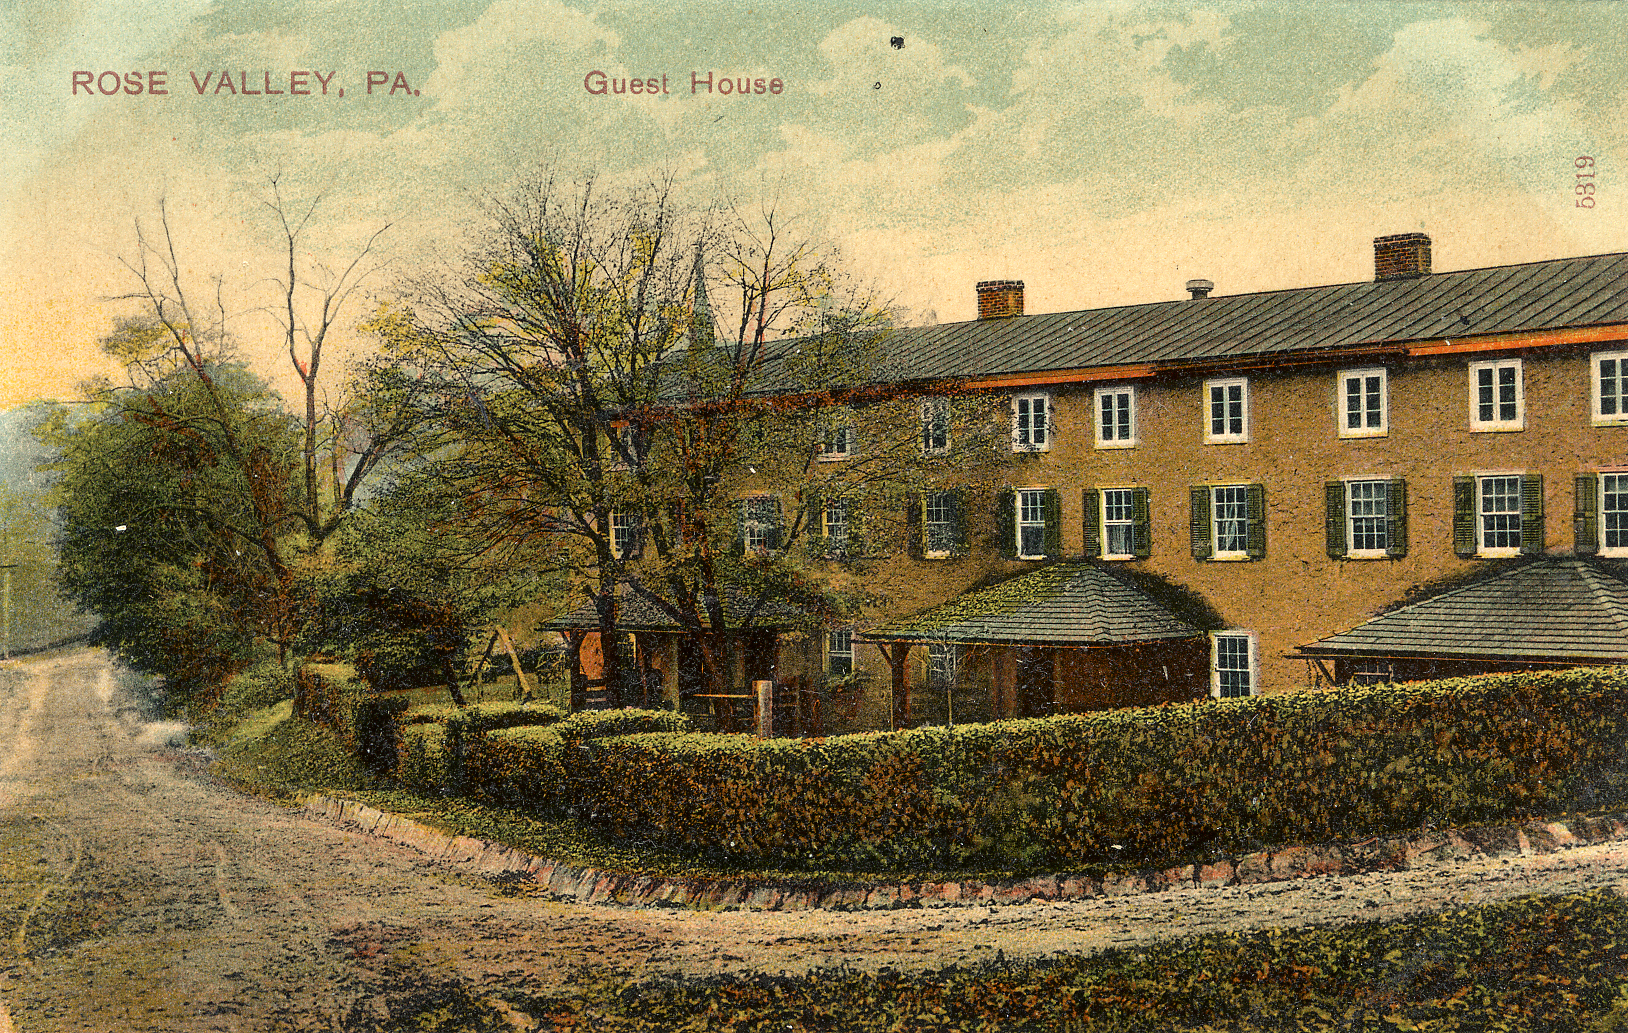 Rose Valley Pa. Guest House c.1904 pc